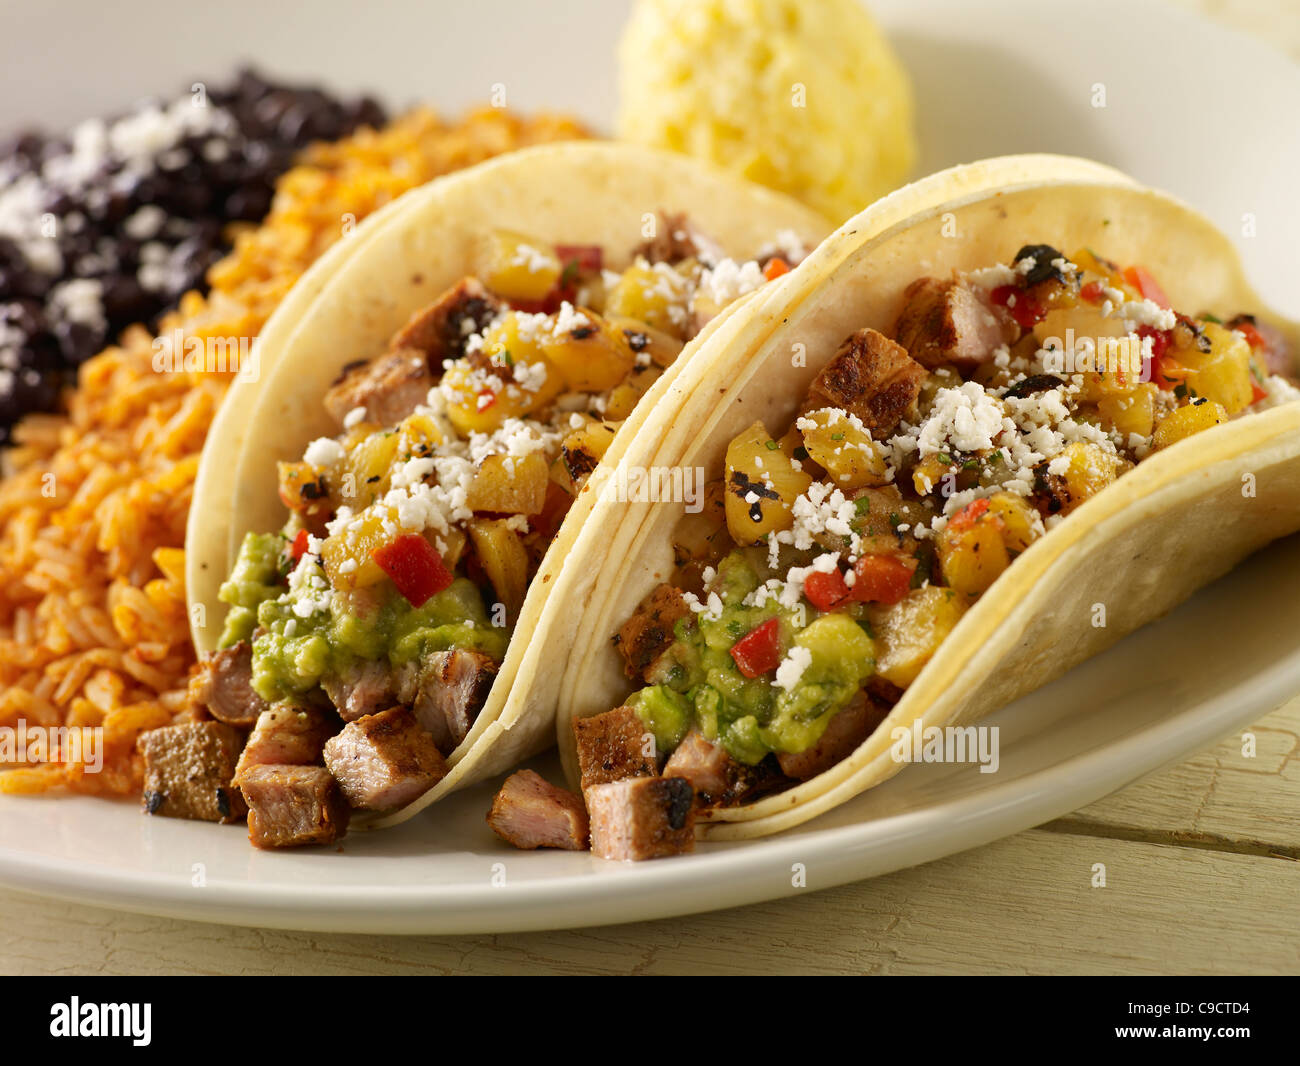 Grilled steak tacos Stock Photo